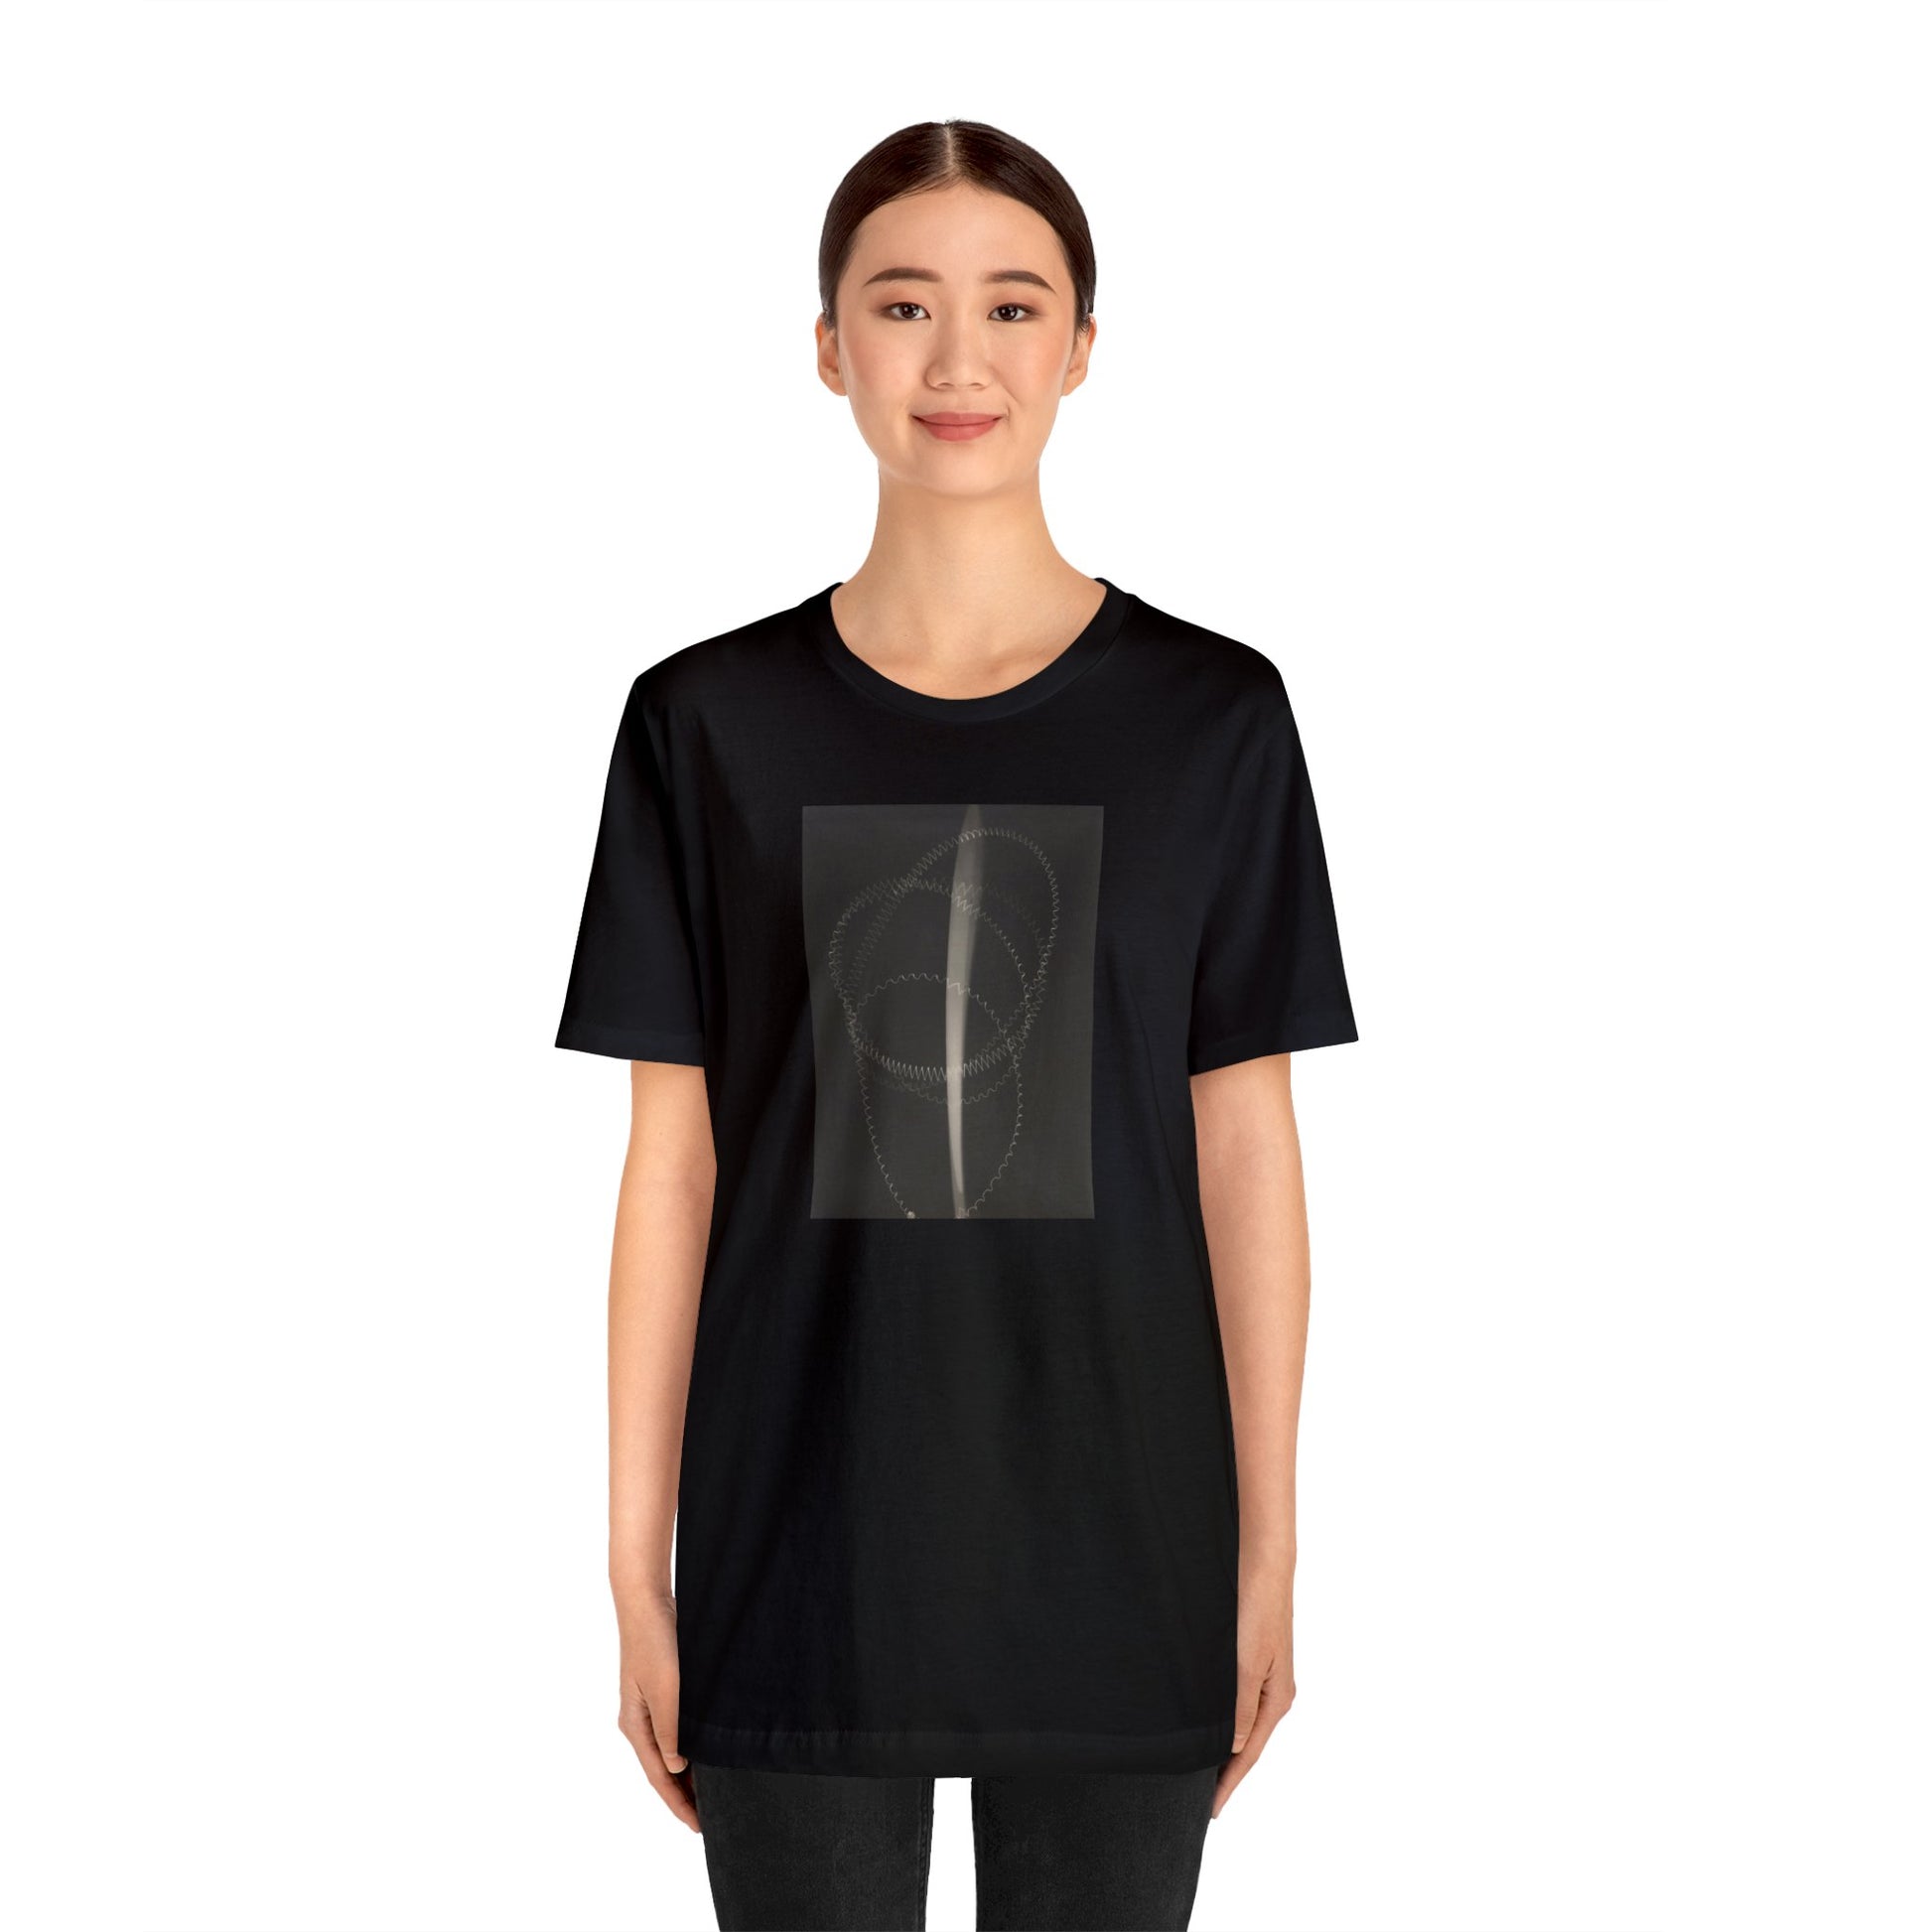 MAN RAY - THE FEATHER - UNISEX JERSEY T-SHIRT